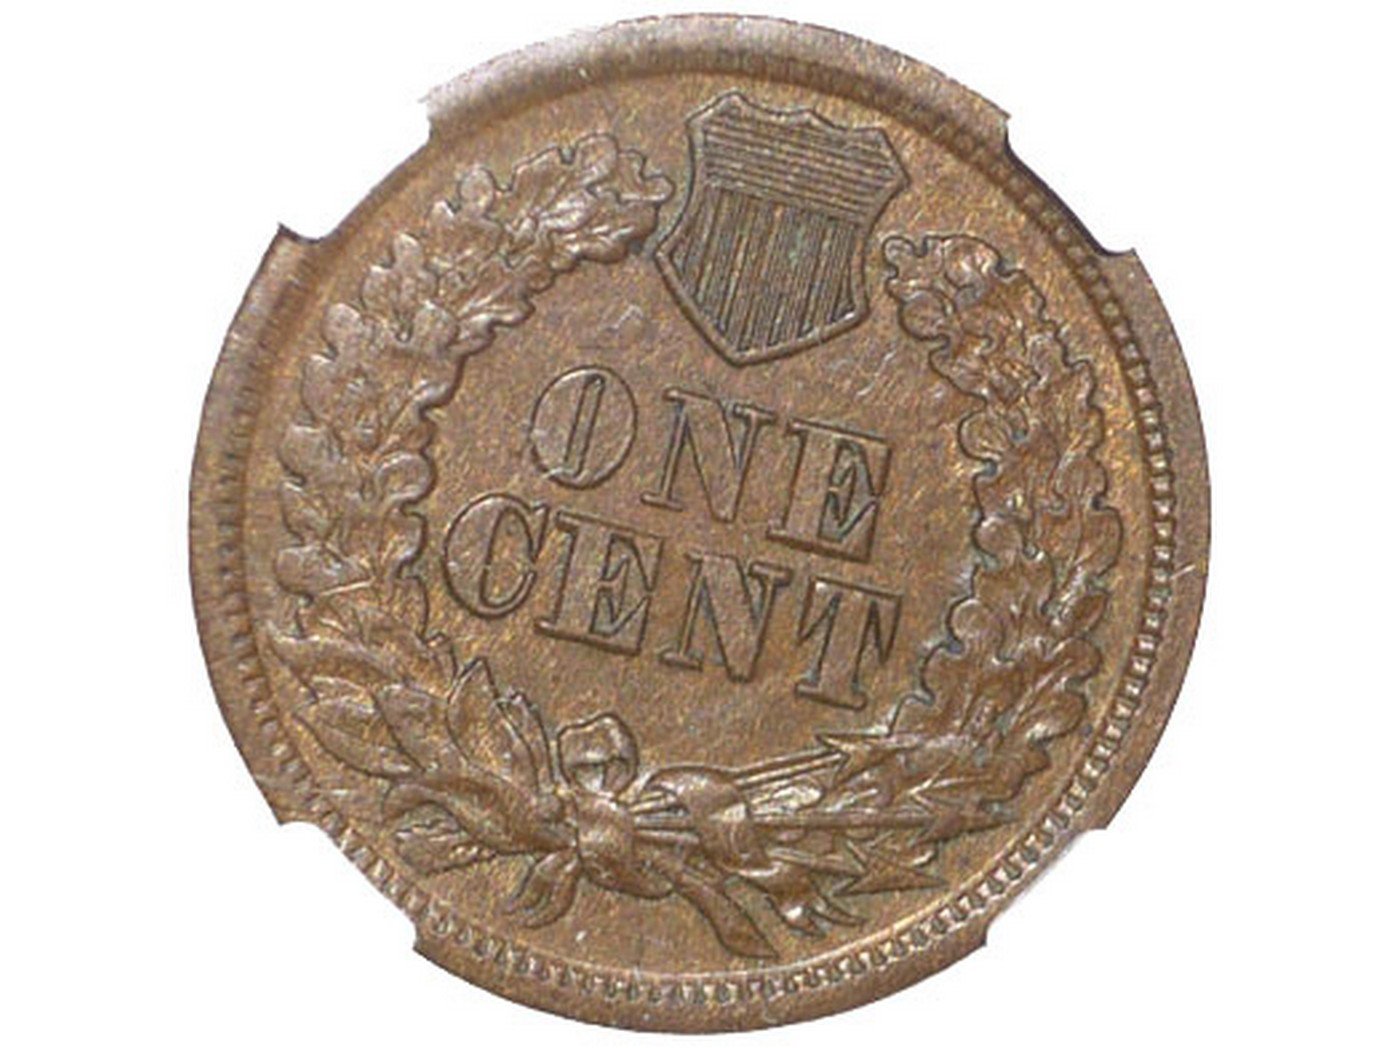 1864 Reverse of No-L RPD-011 - Indian Head Penny - Photo by David Poliquin